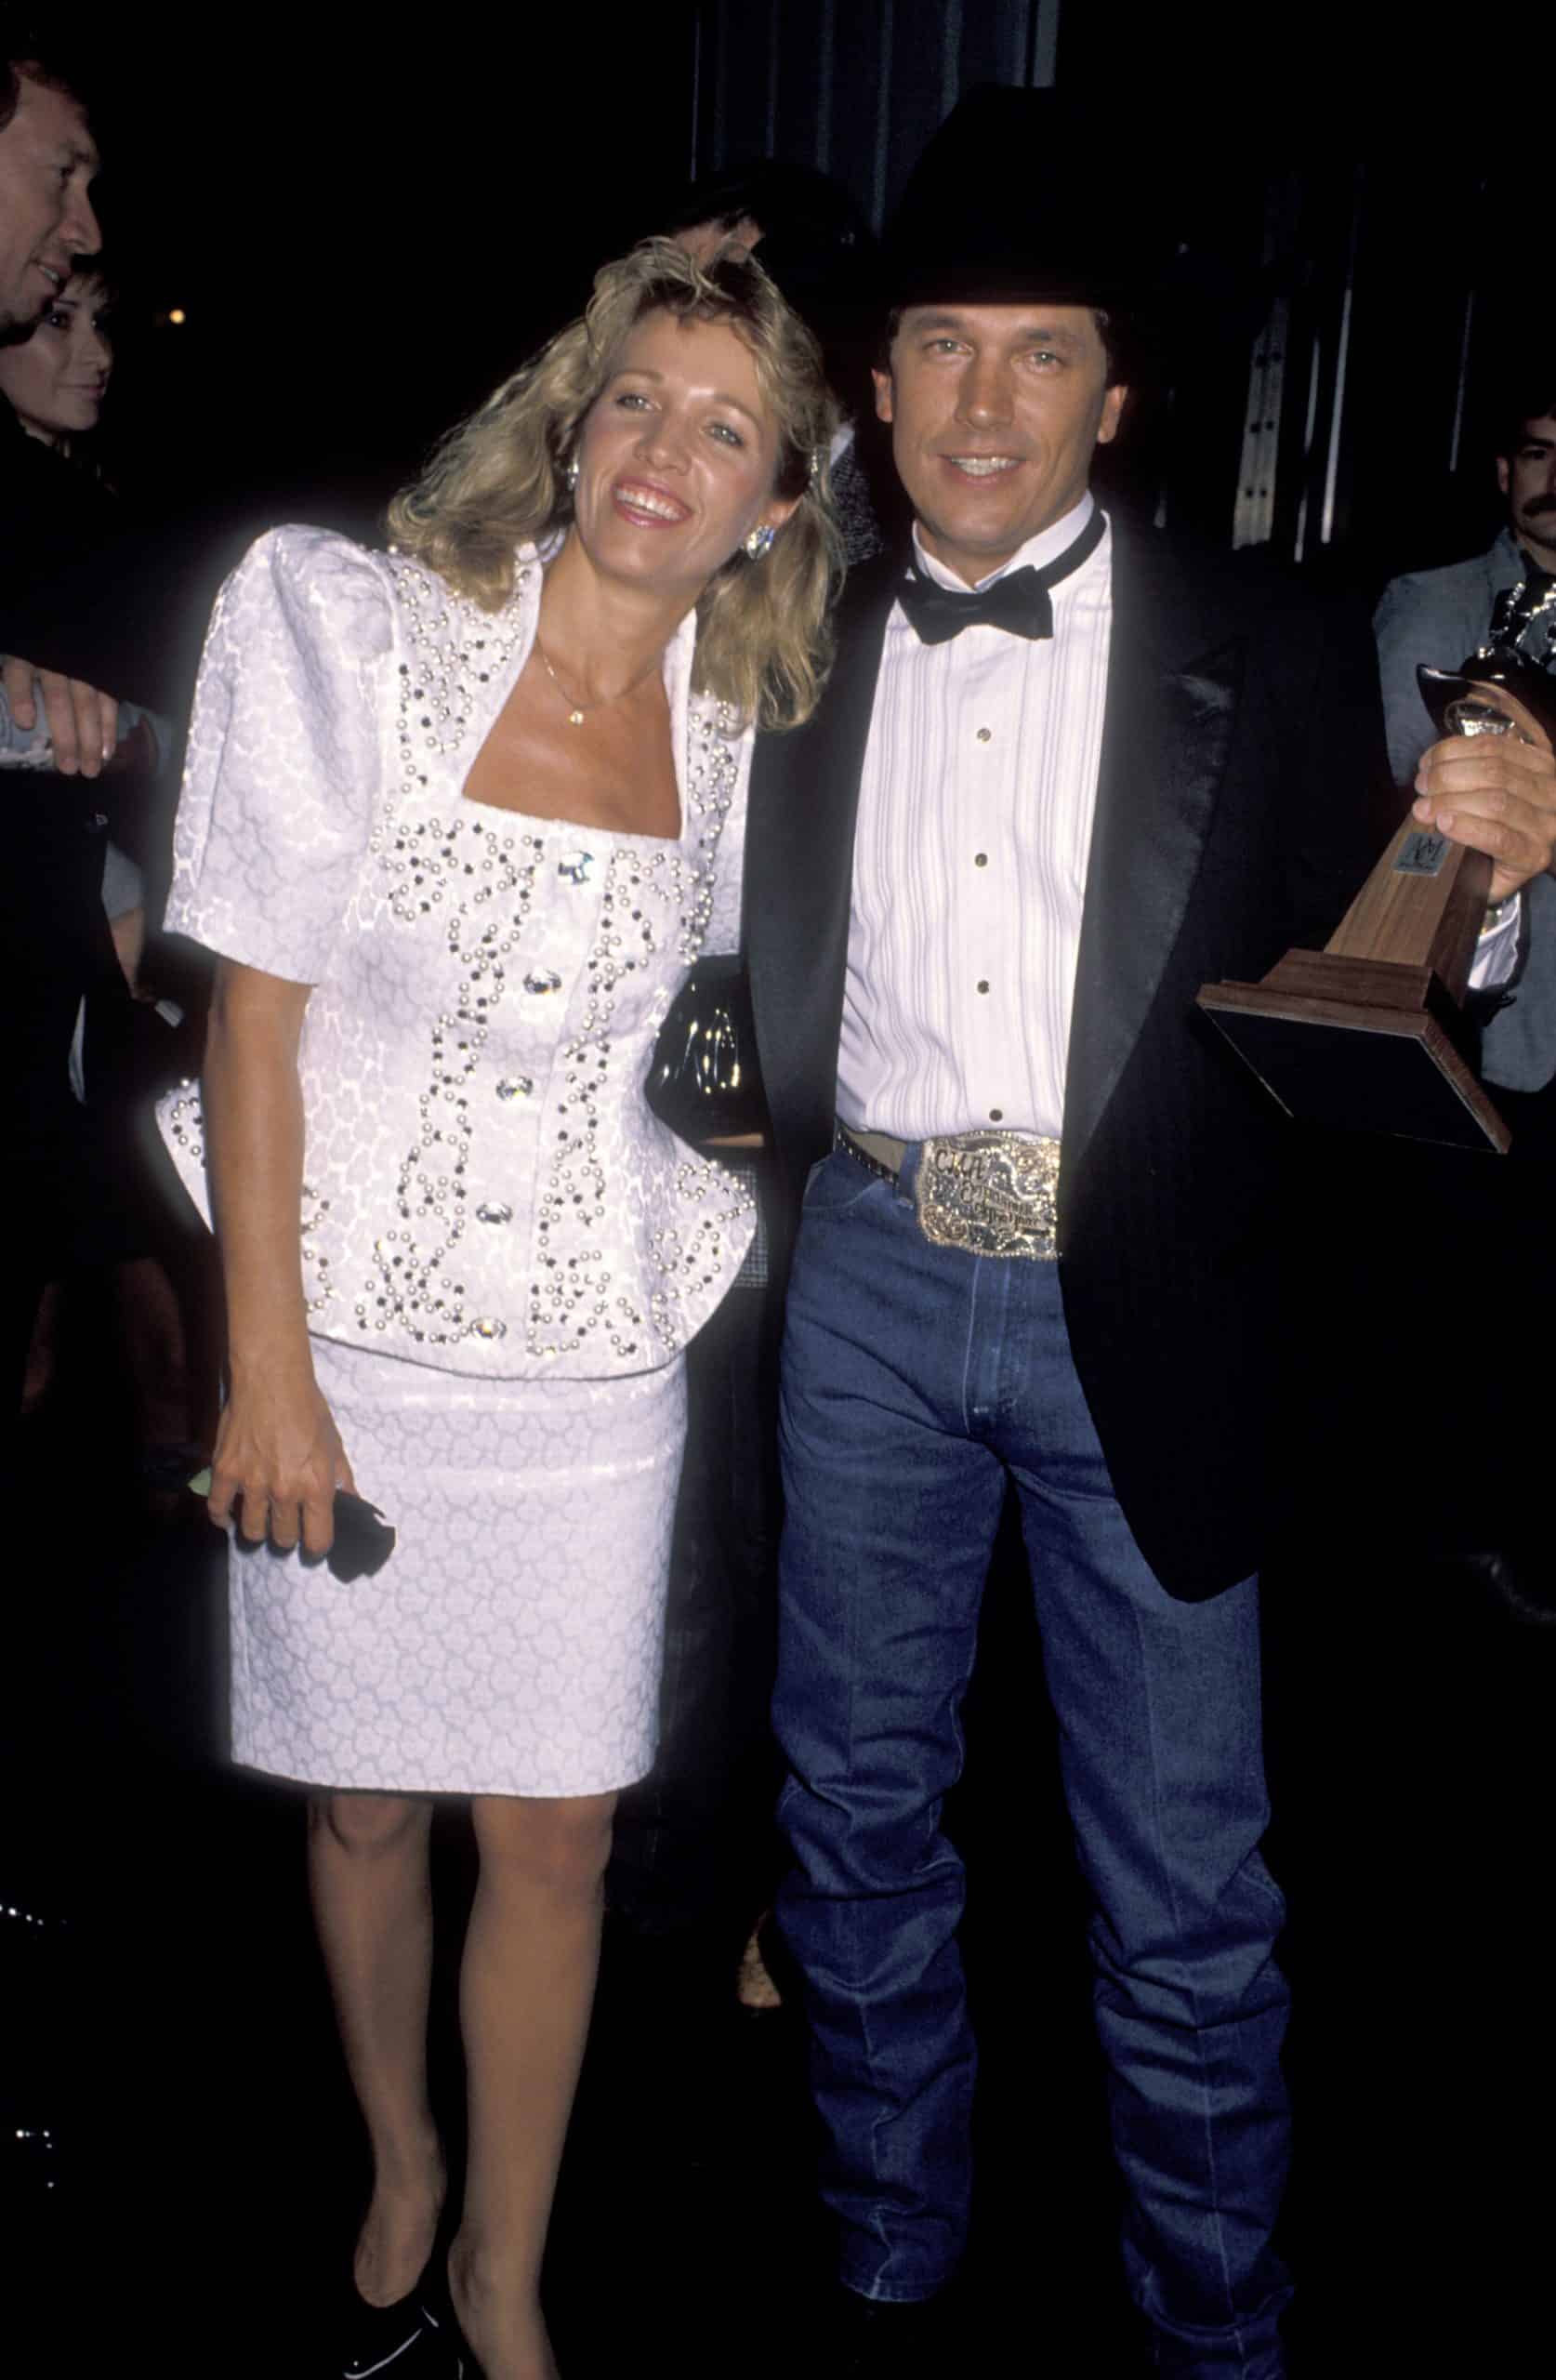 George Strait's wife, Norma, attends the 25th ACM Awards with him.